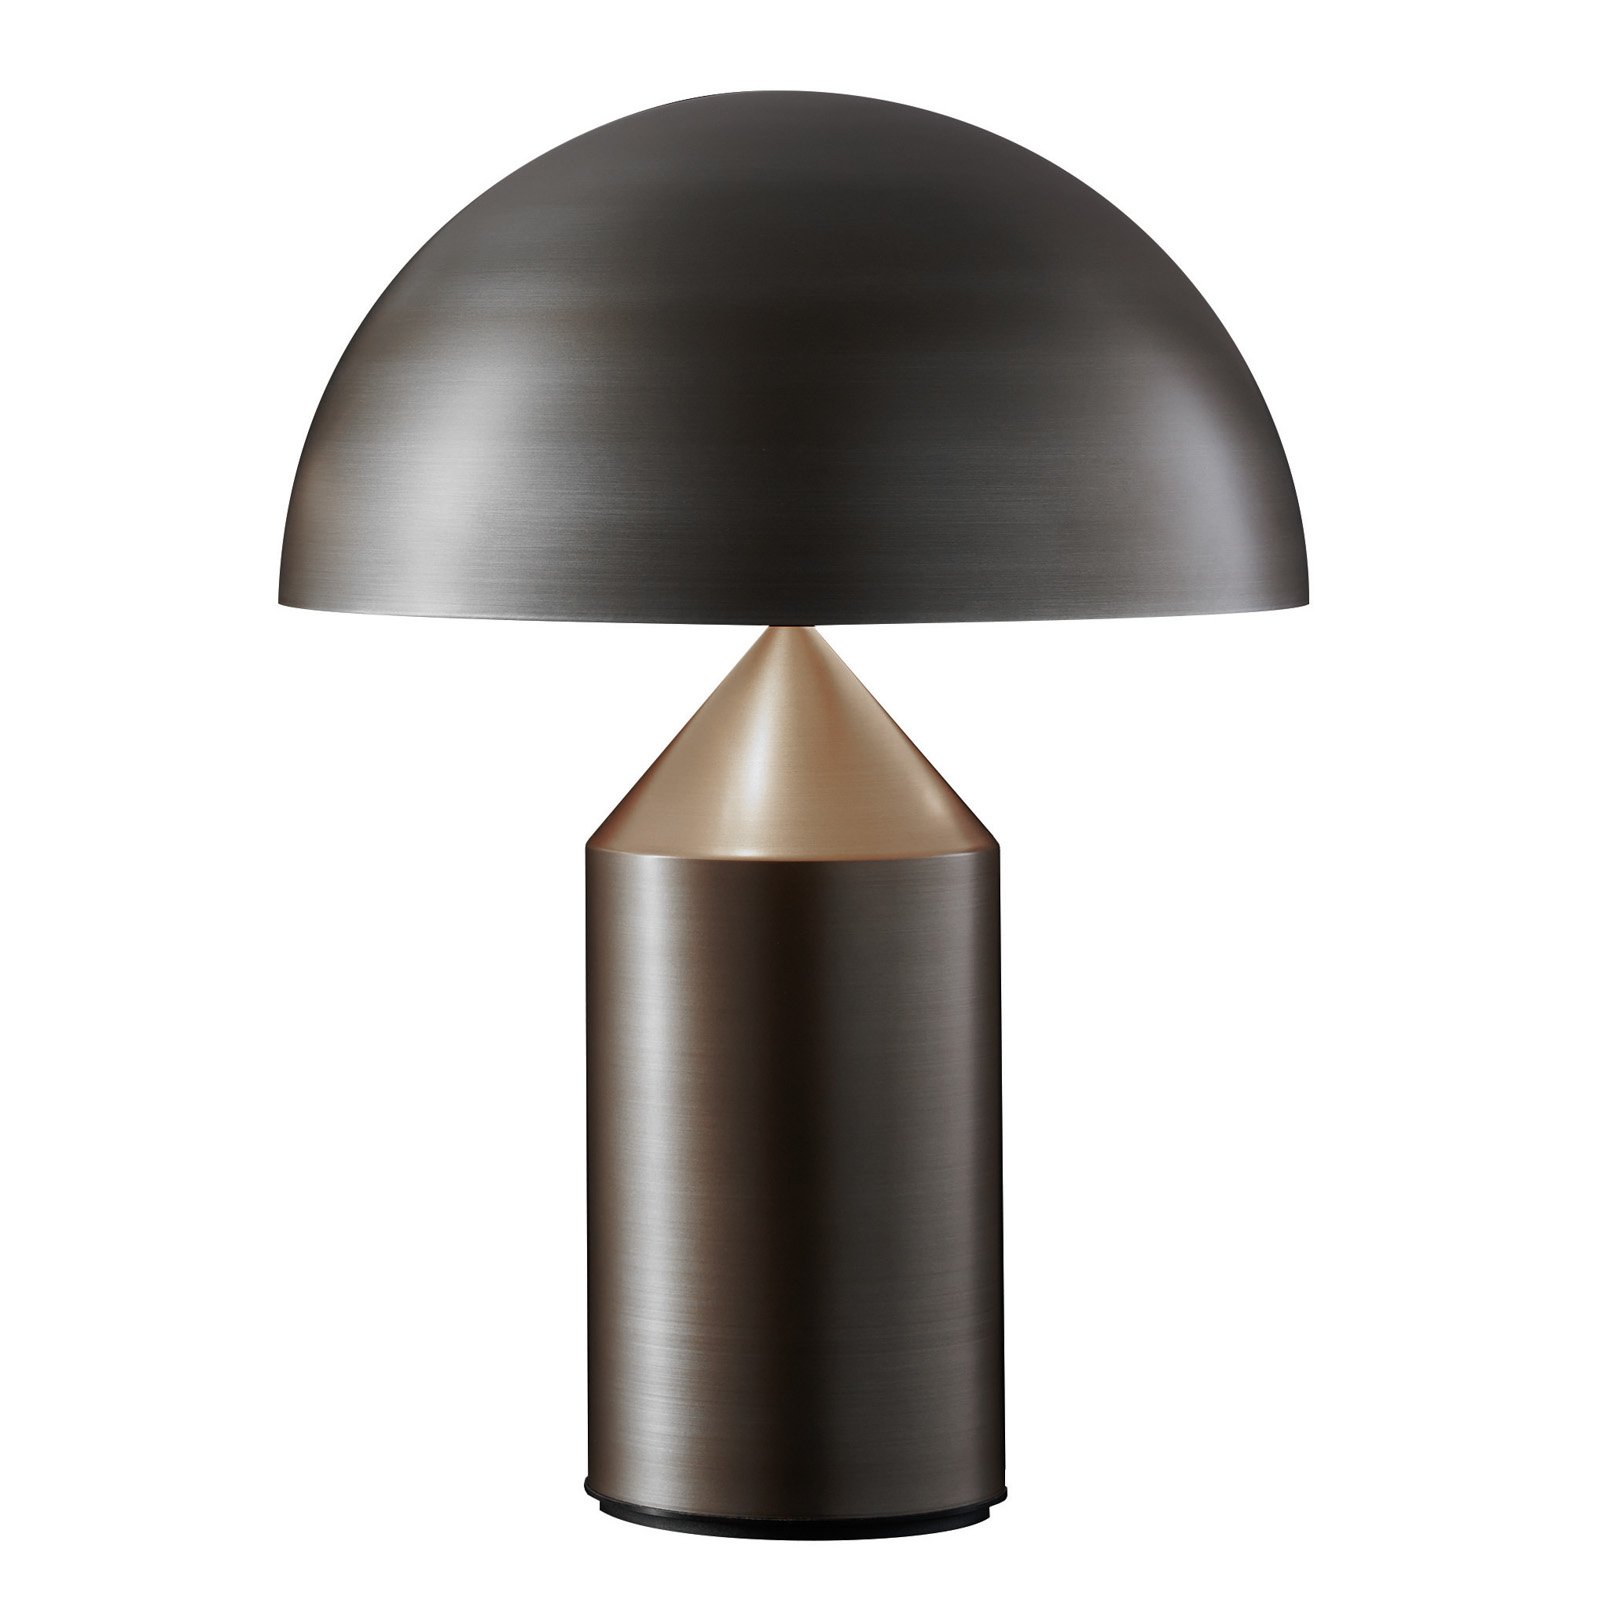 Oluce Atollo table lamp, dimmable, Ø38cm, bronze